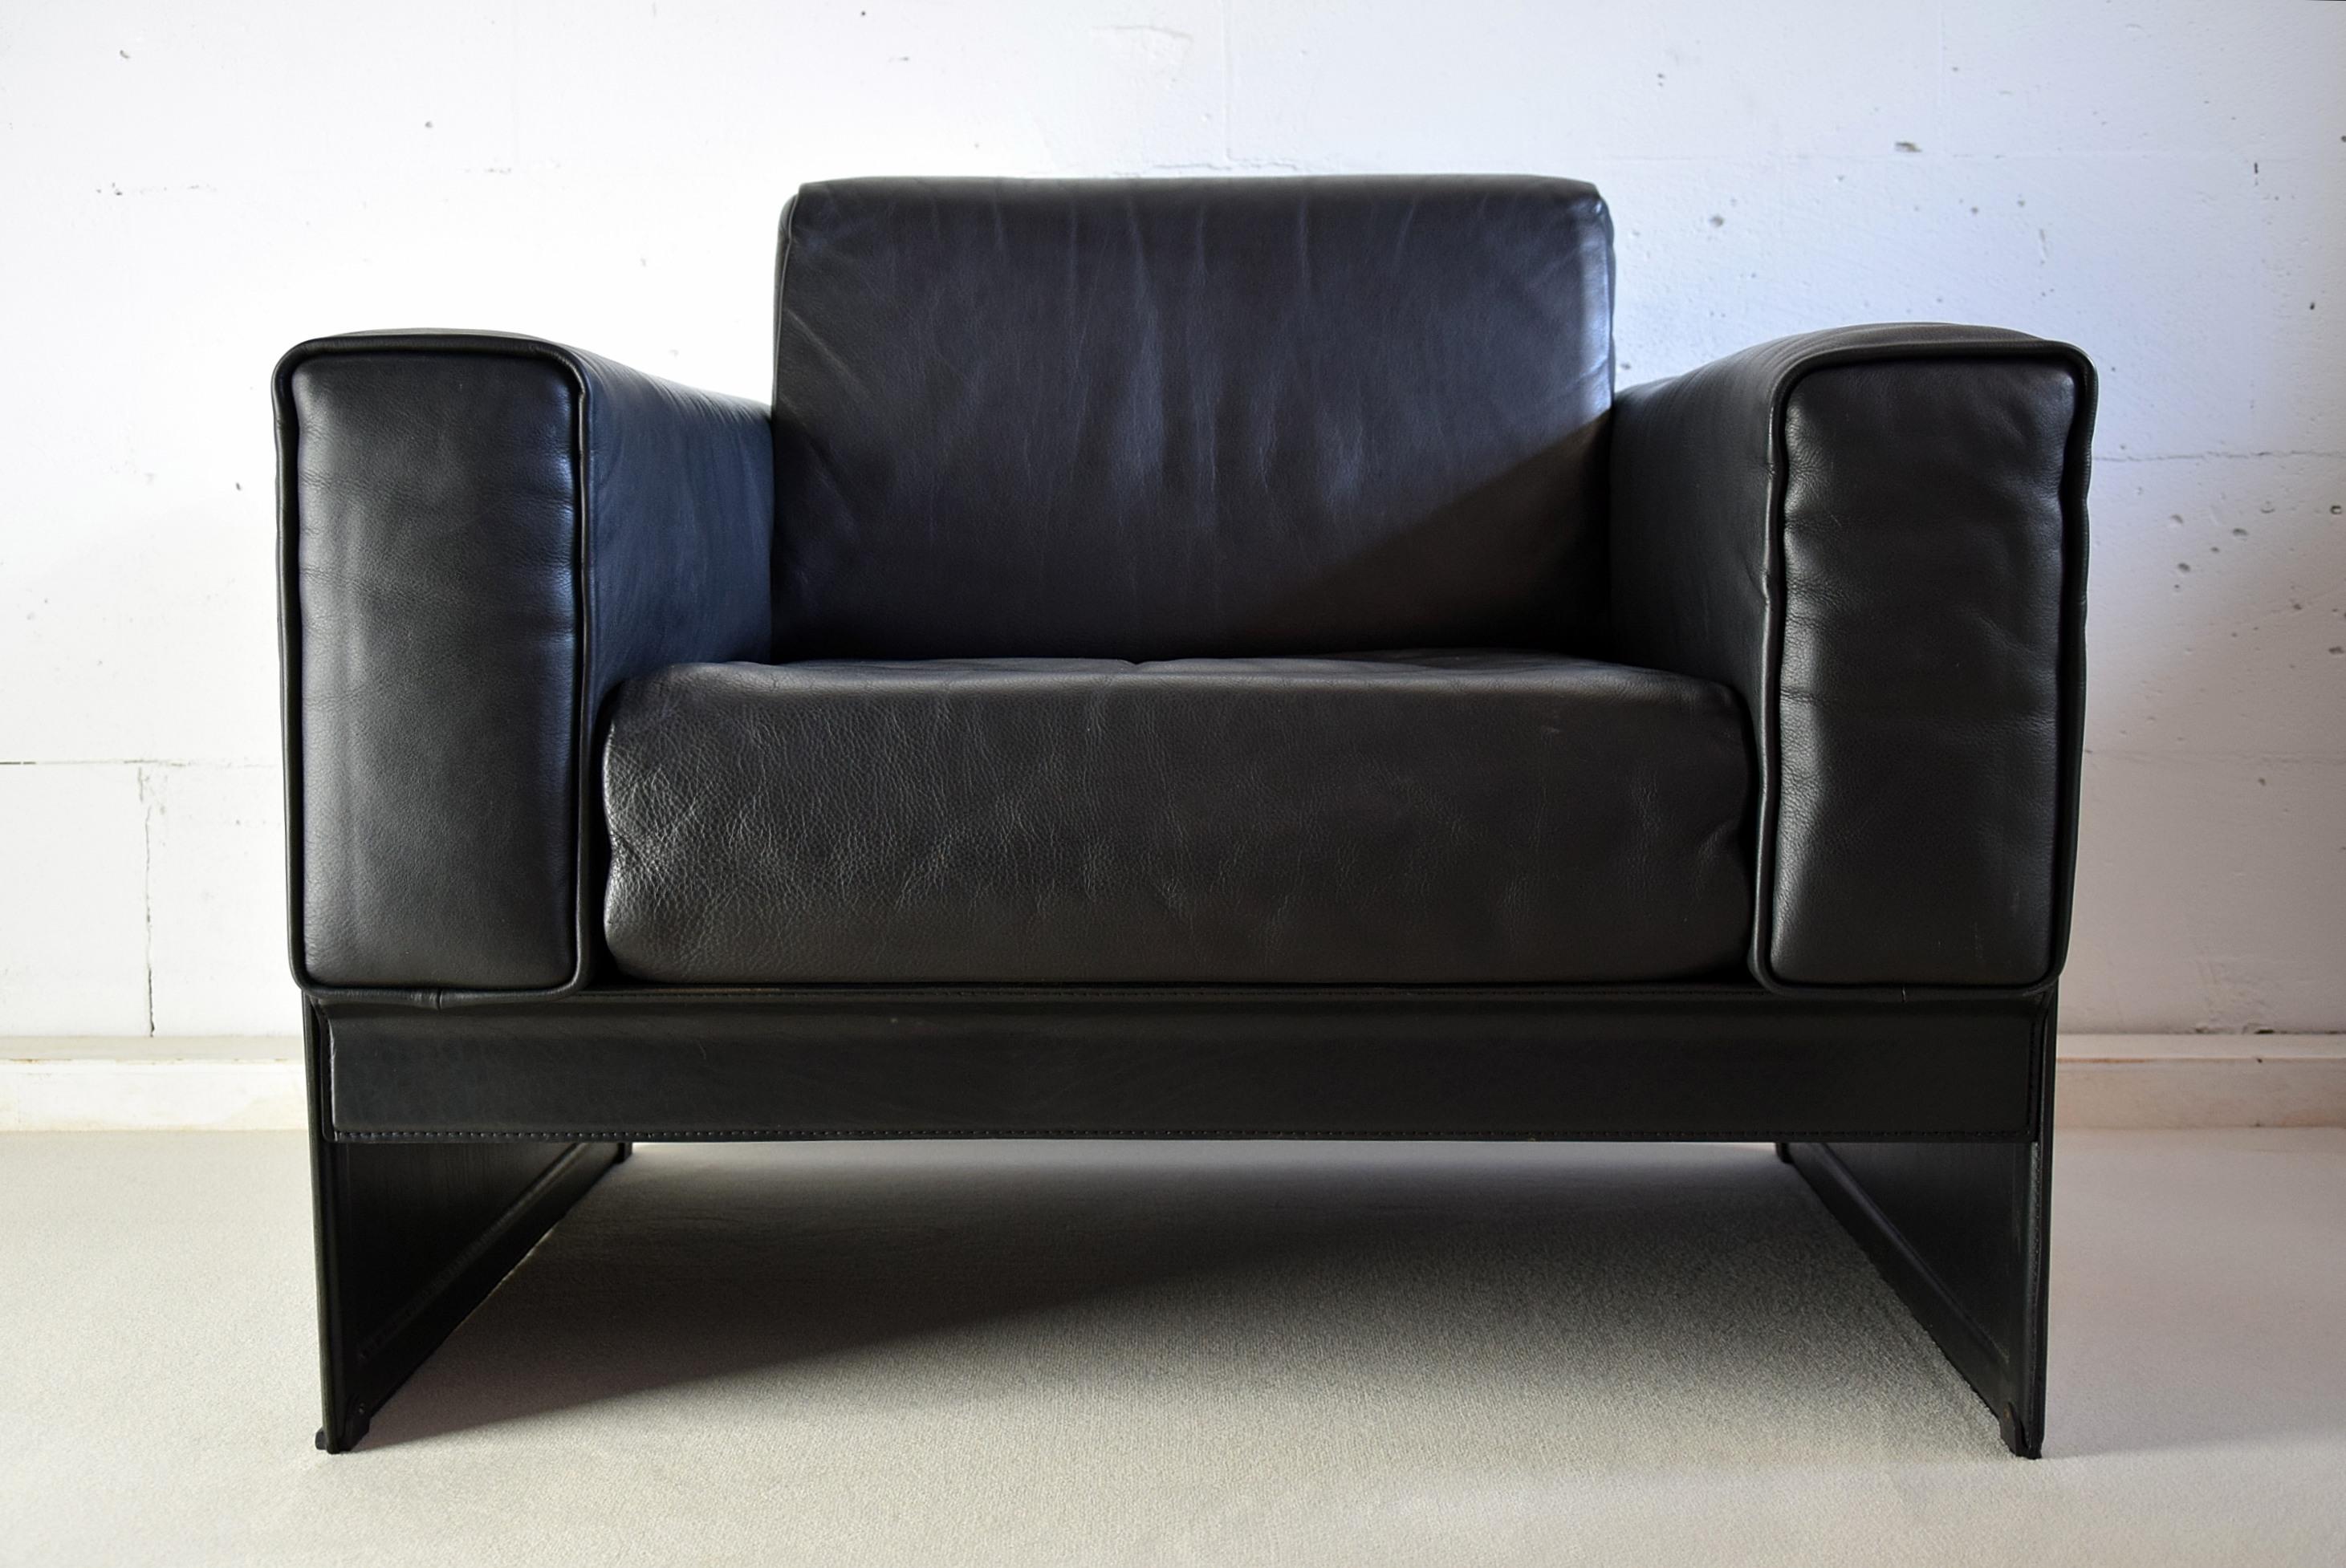 Pair of Korium Black Leather Lounge Chairs by Tito Agnoli for Matteo Grassi For Sale 2